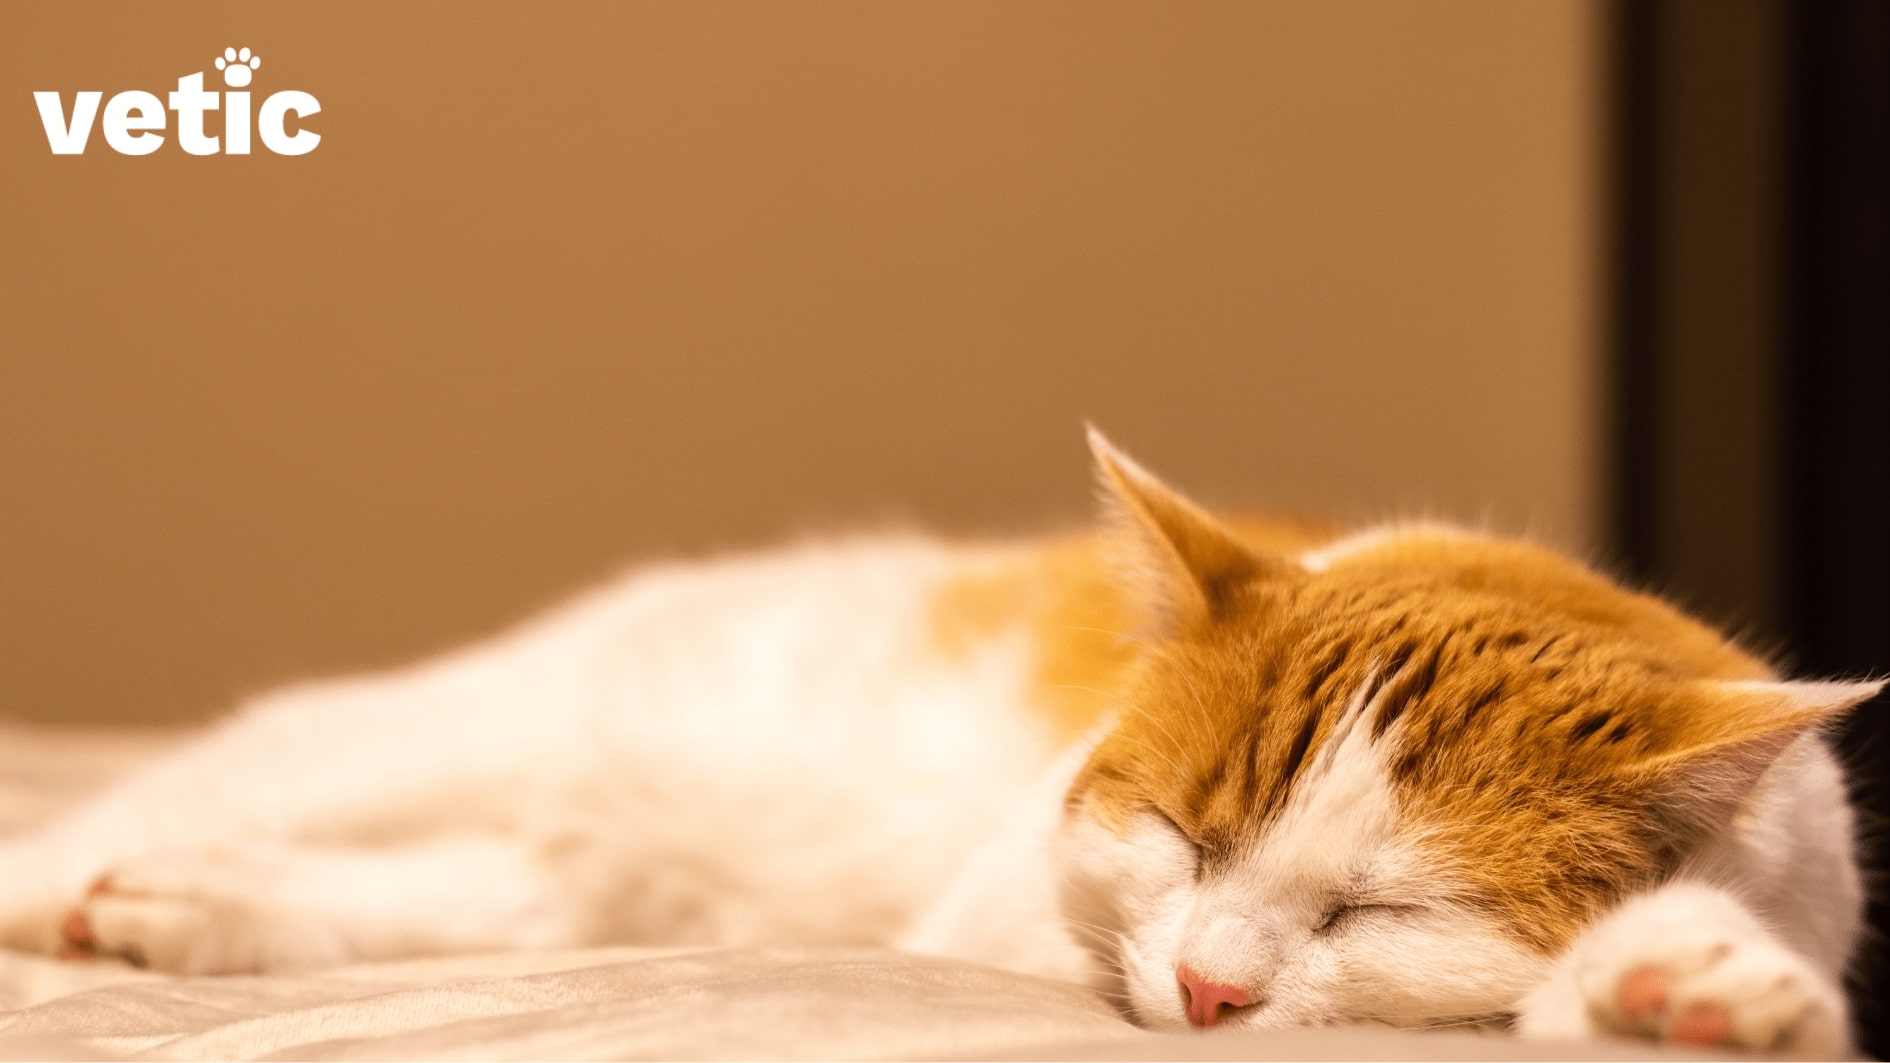 Orange and white cat sleeping on the bed. Cats sleep for at least 16 hours. Leaving your cat alone for 8 hours shouldn't be a problem since they are most likely to sleep through those 8 hours.